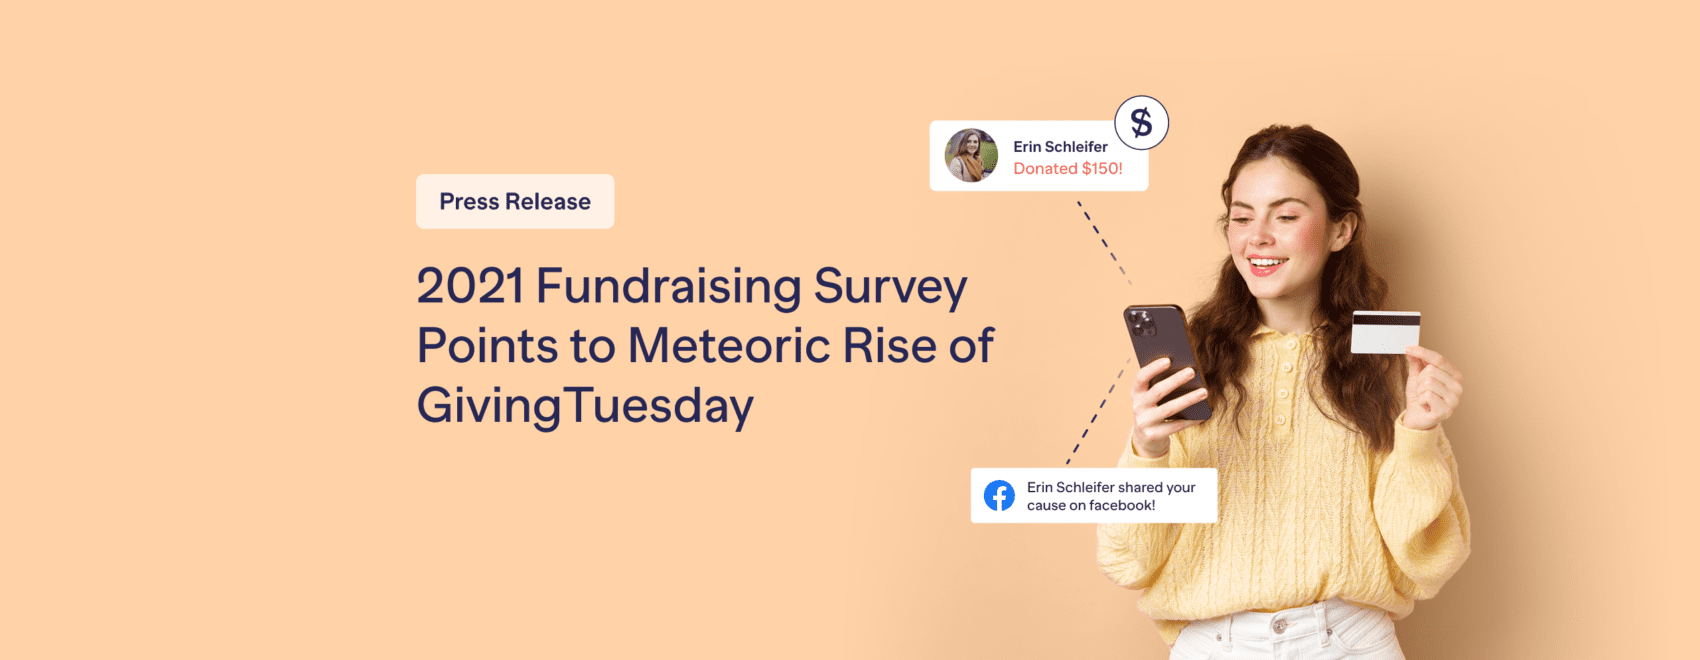 2021 Fundraising Survey Points to Meteoric Rise of GivingTuesday